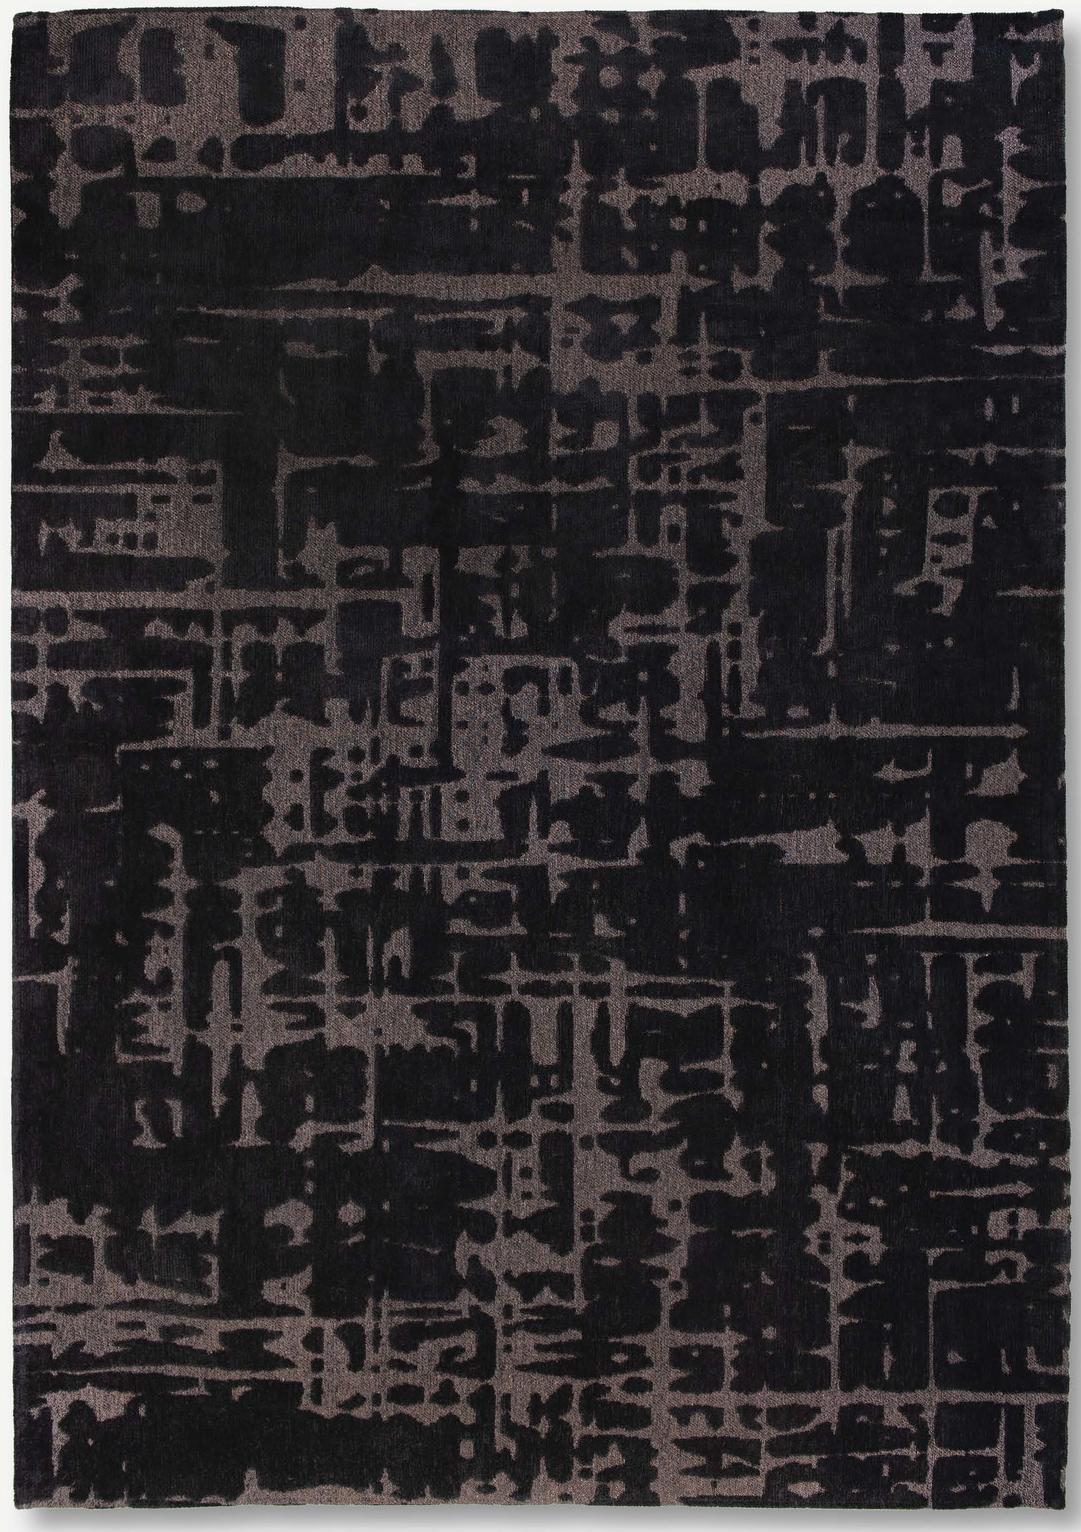 Abstract Black Belgian Rug ☞ Size: 5' 7" x 8' (170 x 240 cm)